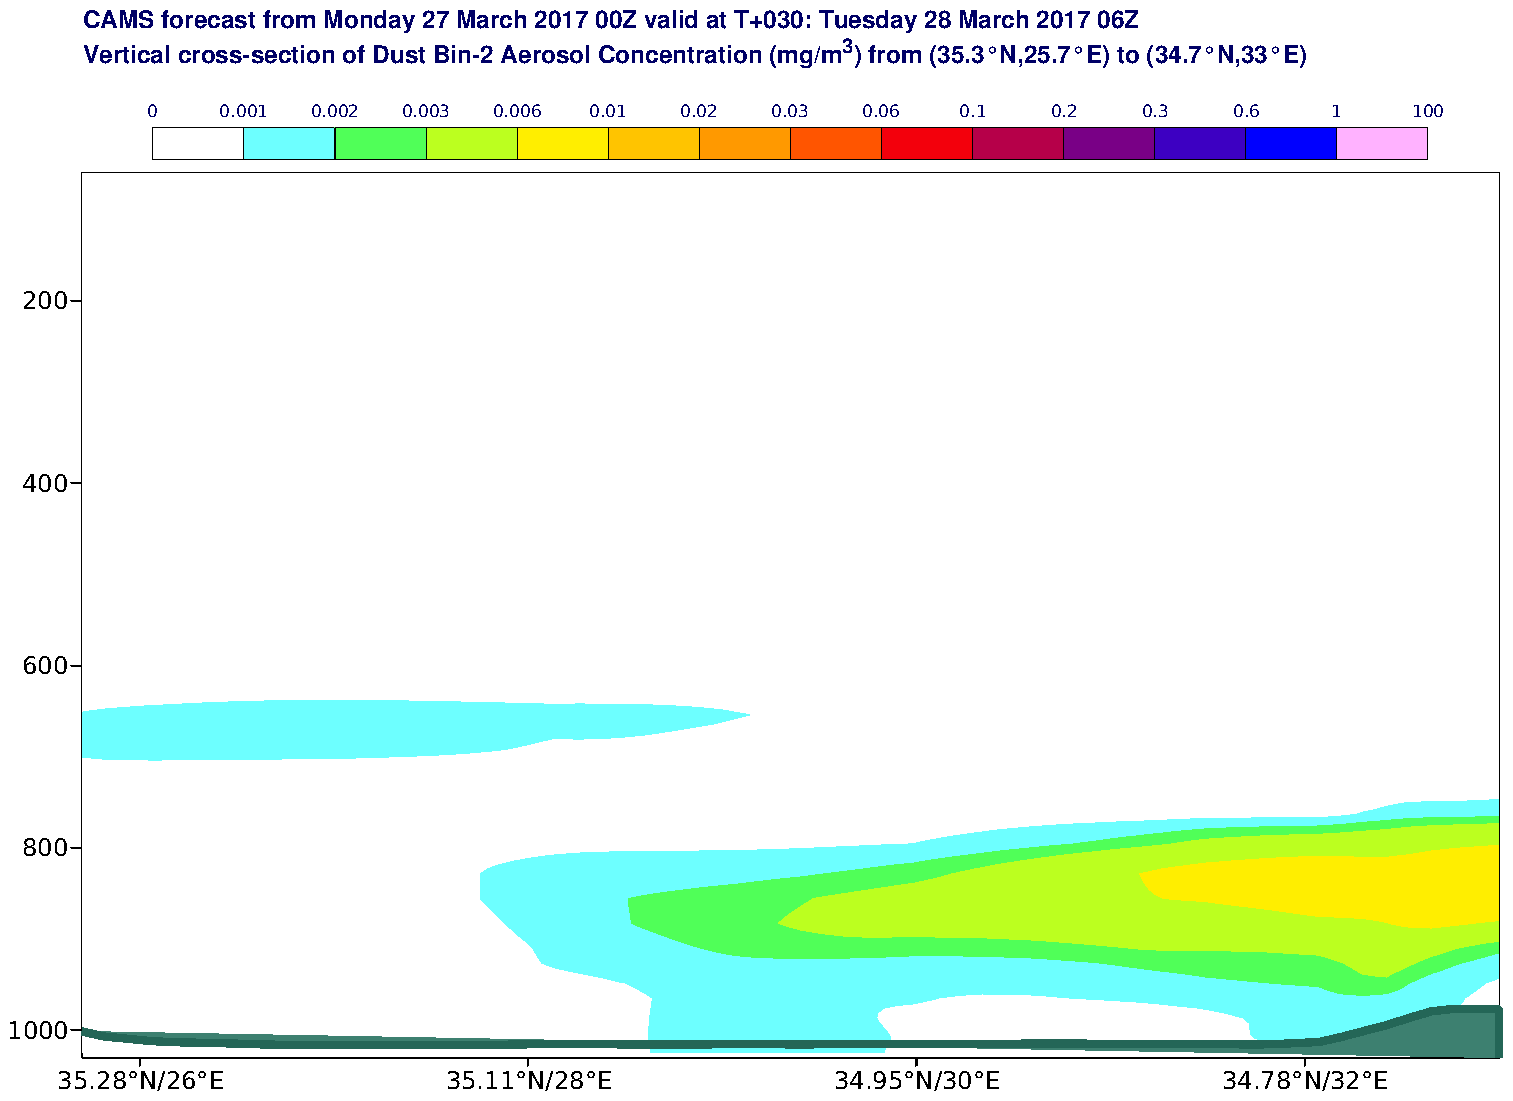 Vertical cross-section of Dust Bin-2 Aerosol Concentration (mg/m3) valid at T30 - 2017-03-28 06:00